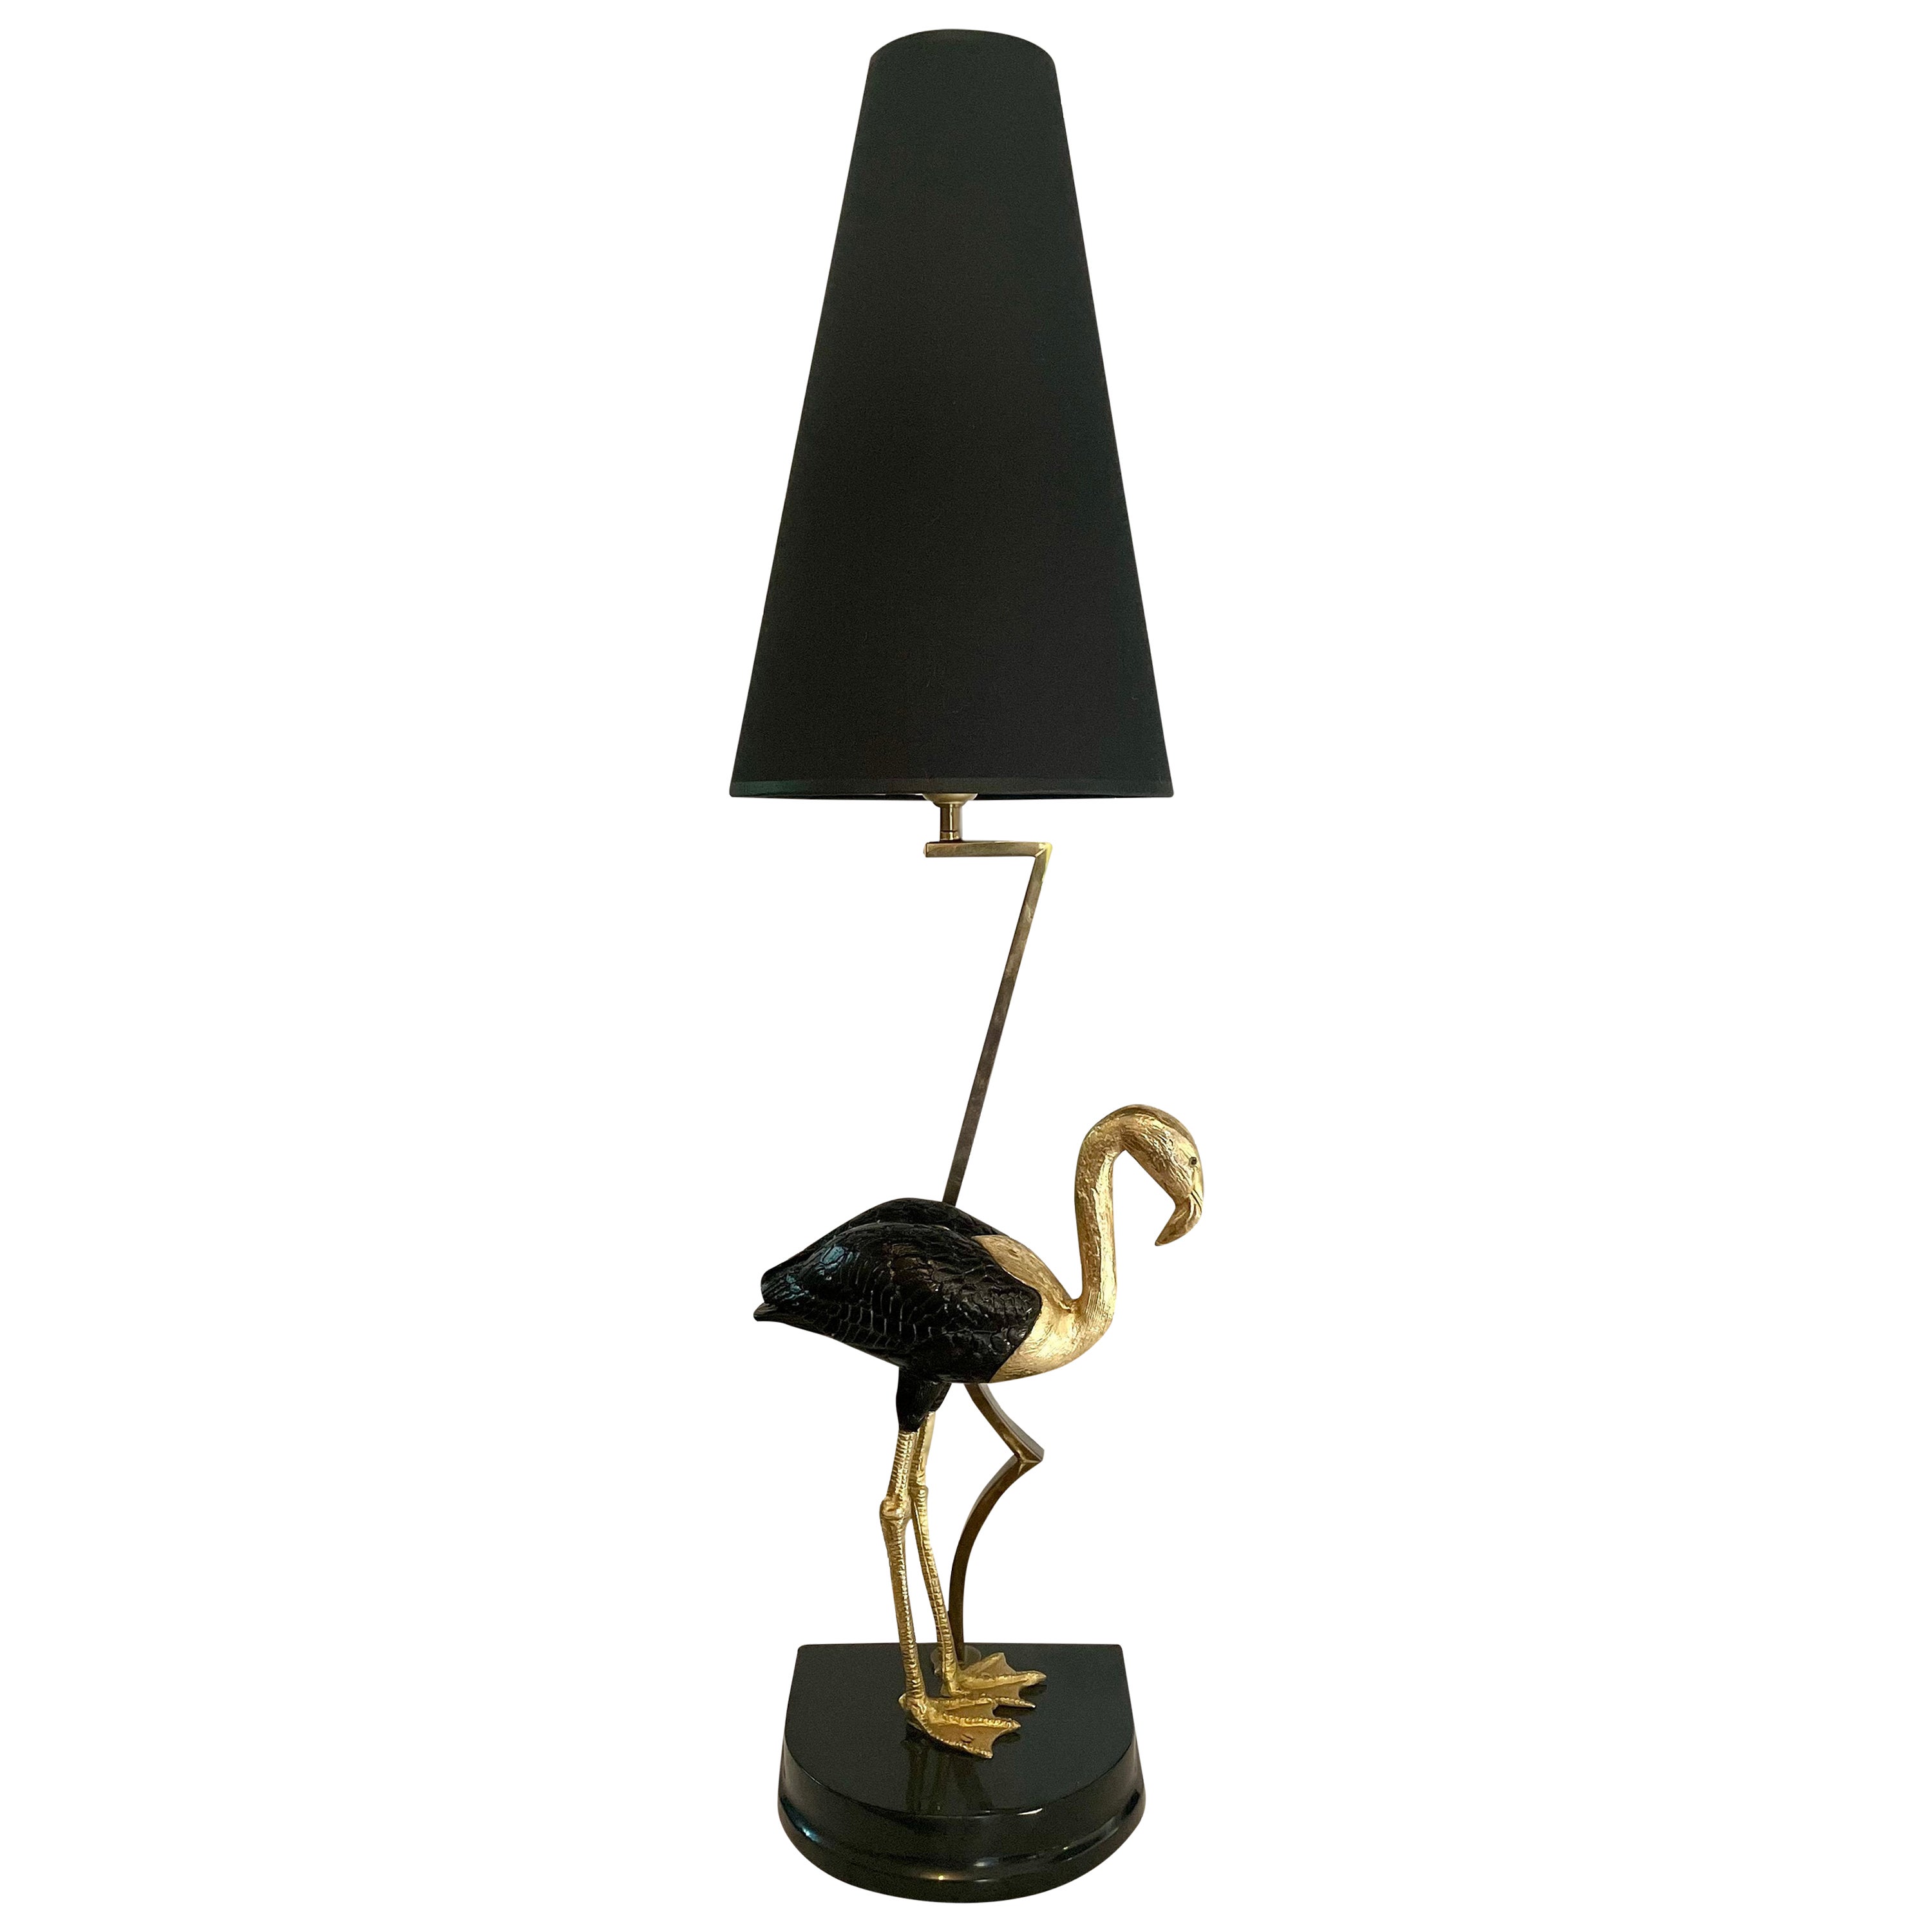 Vintage Pink Flamand Table Lamp, Italy, 1970s Wood and Brass, Hollywood Regency